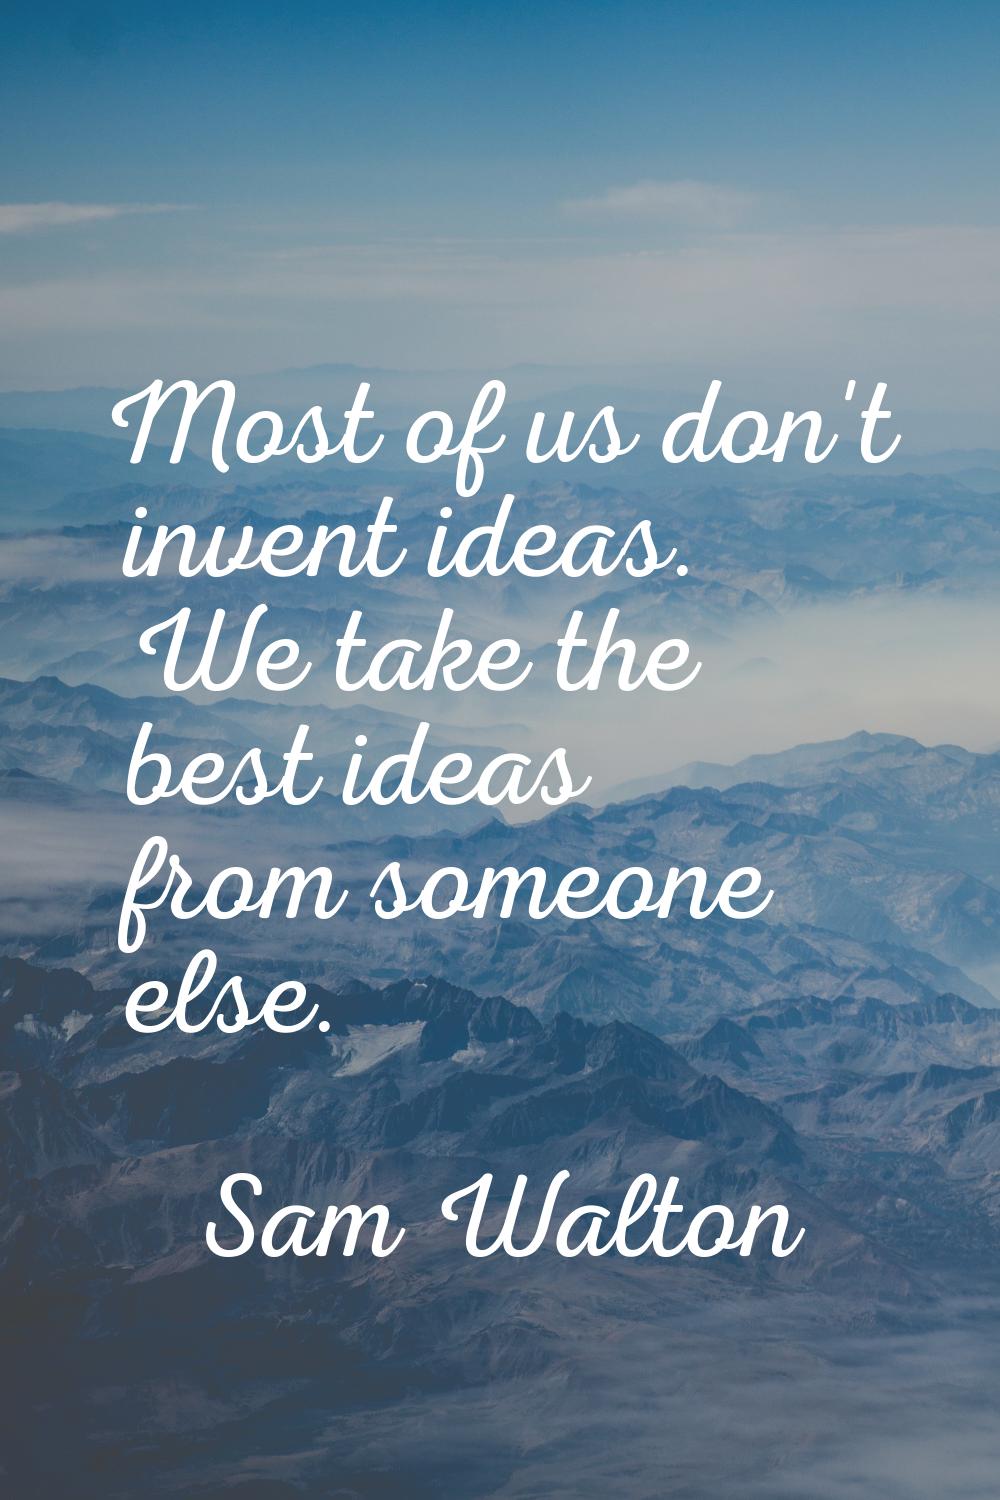 Most of us don't invent ideas. We take the best ideas from someone else.